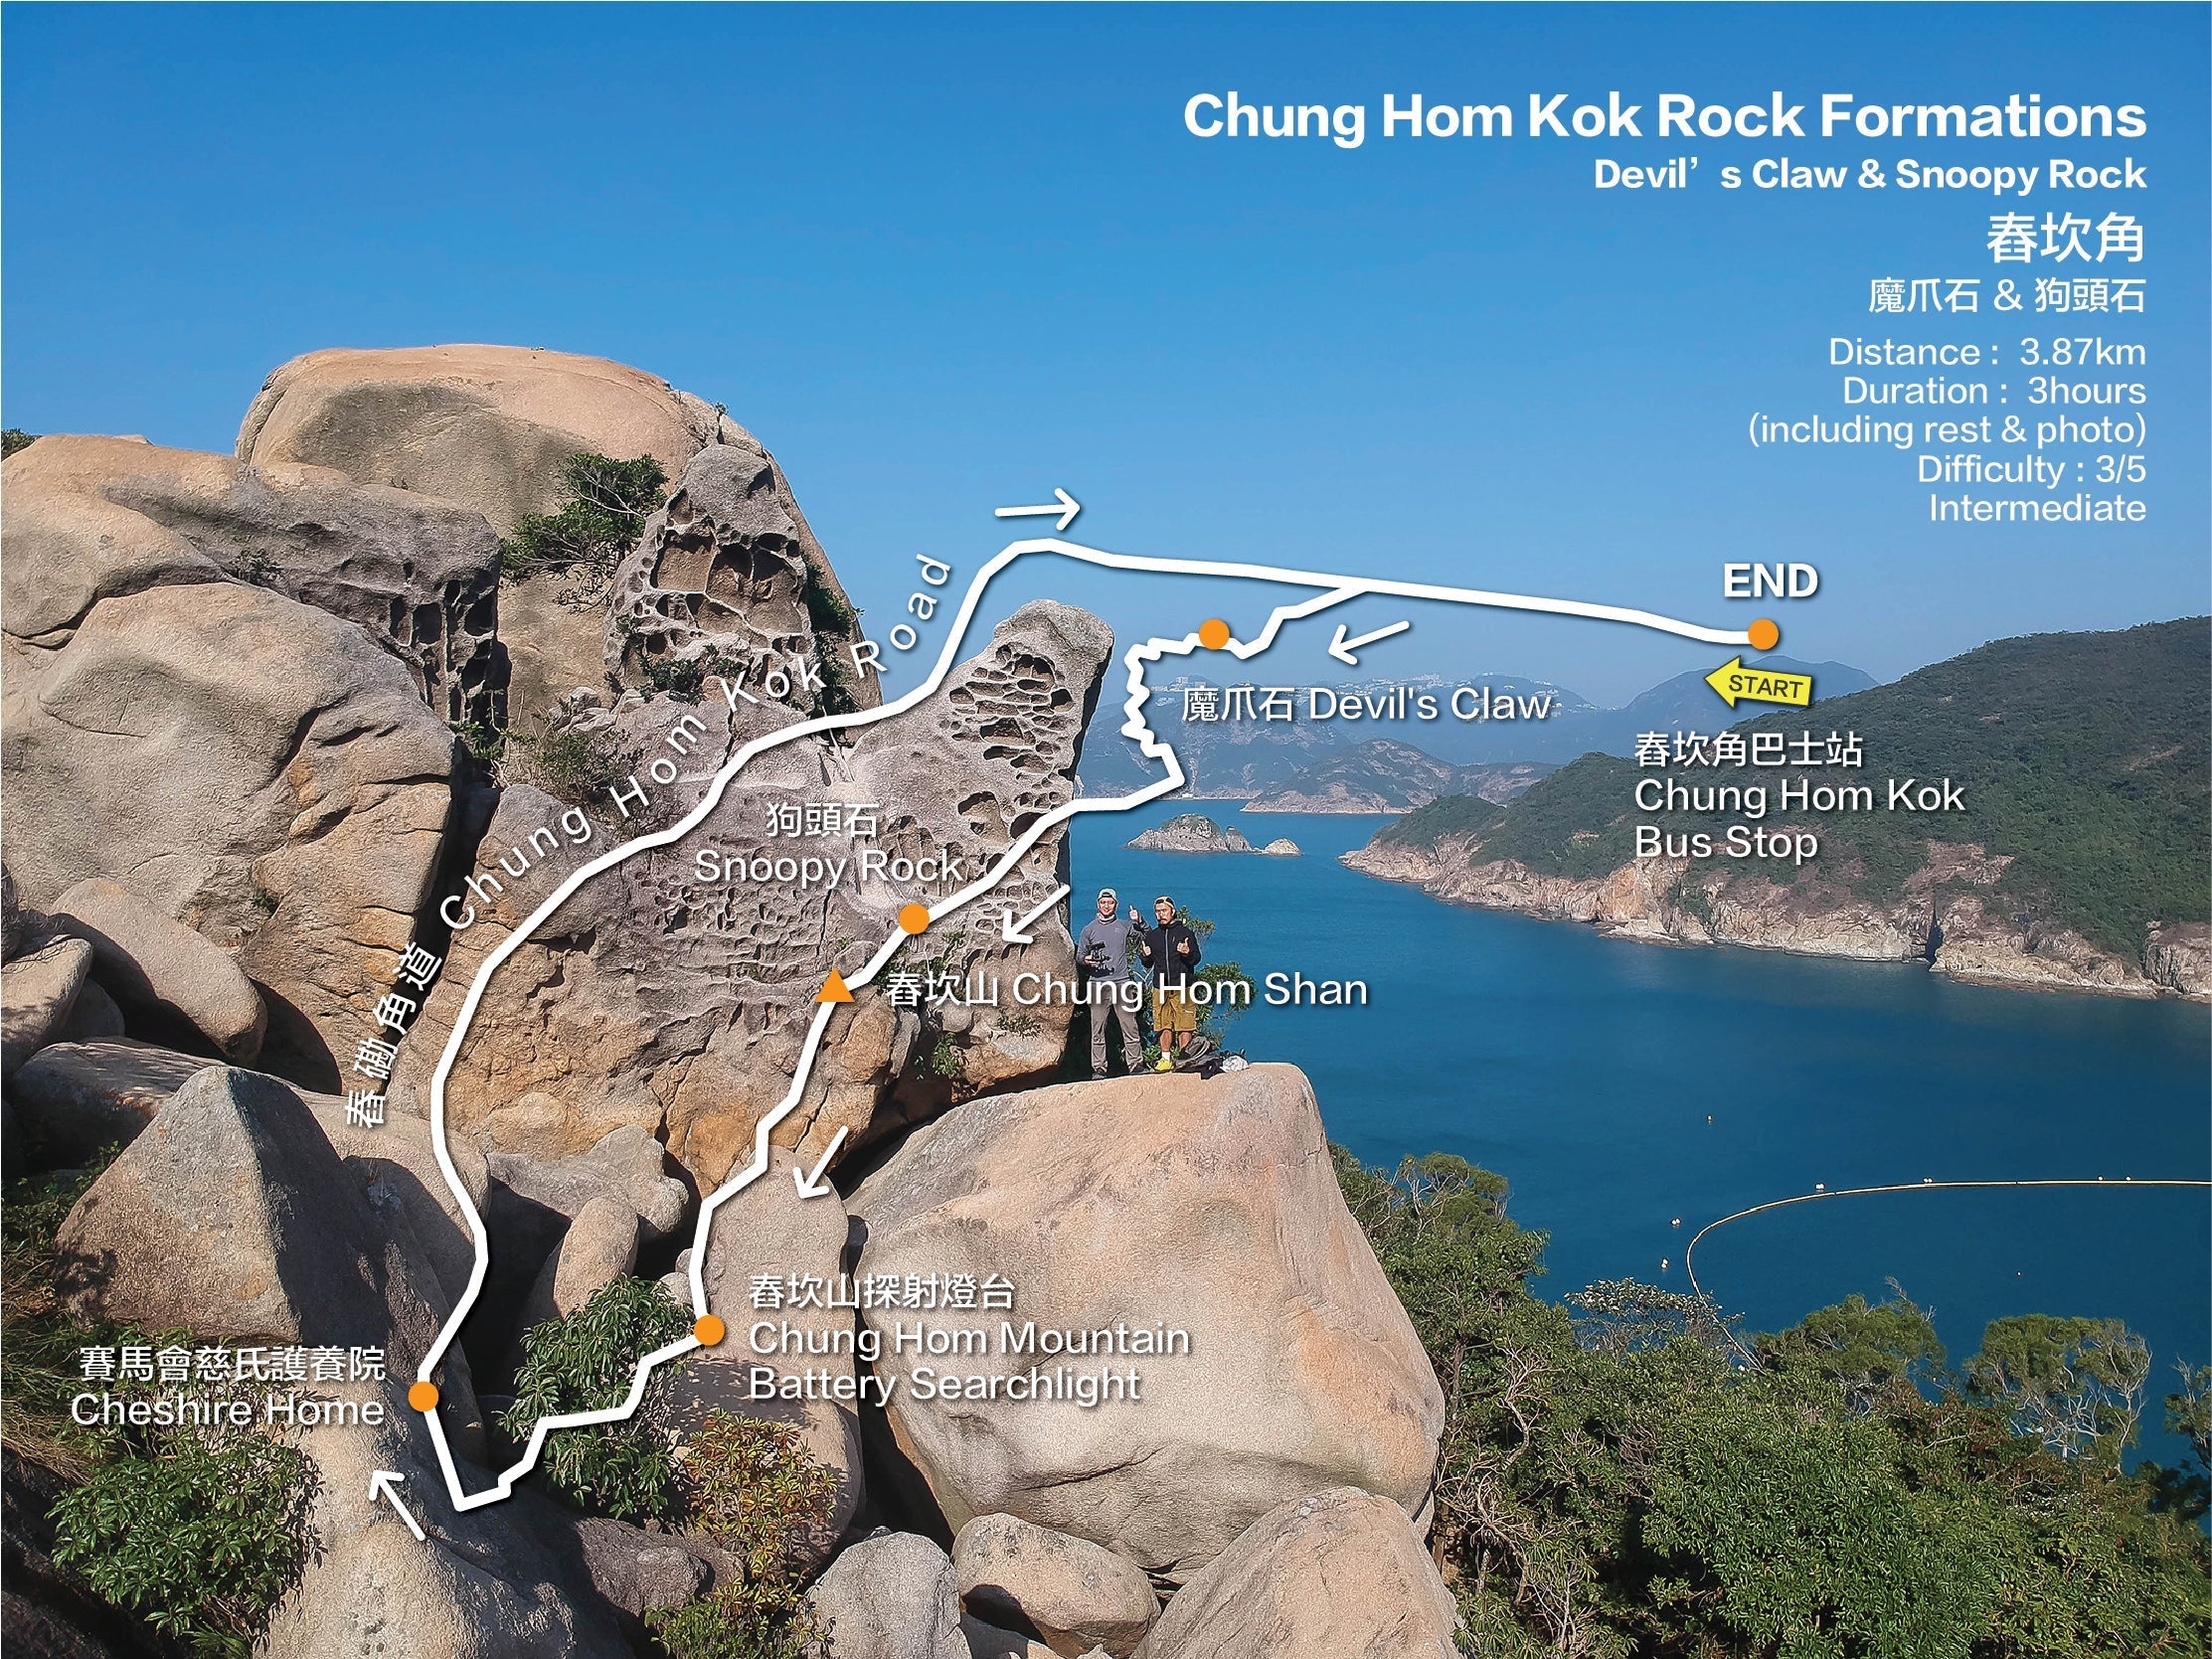 Chung Hom Kok Rock Formations | Devil's Claw & Snoopy Rock